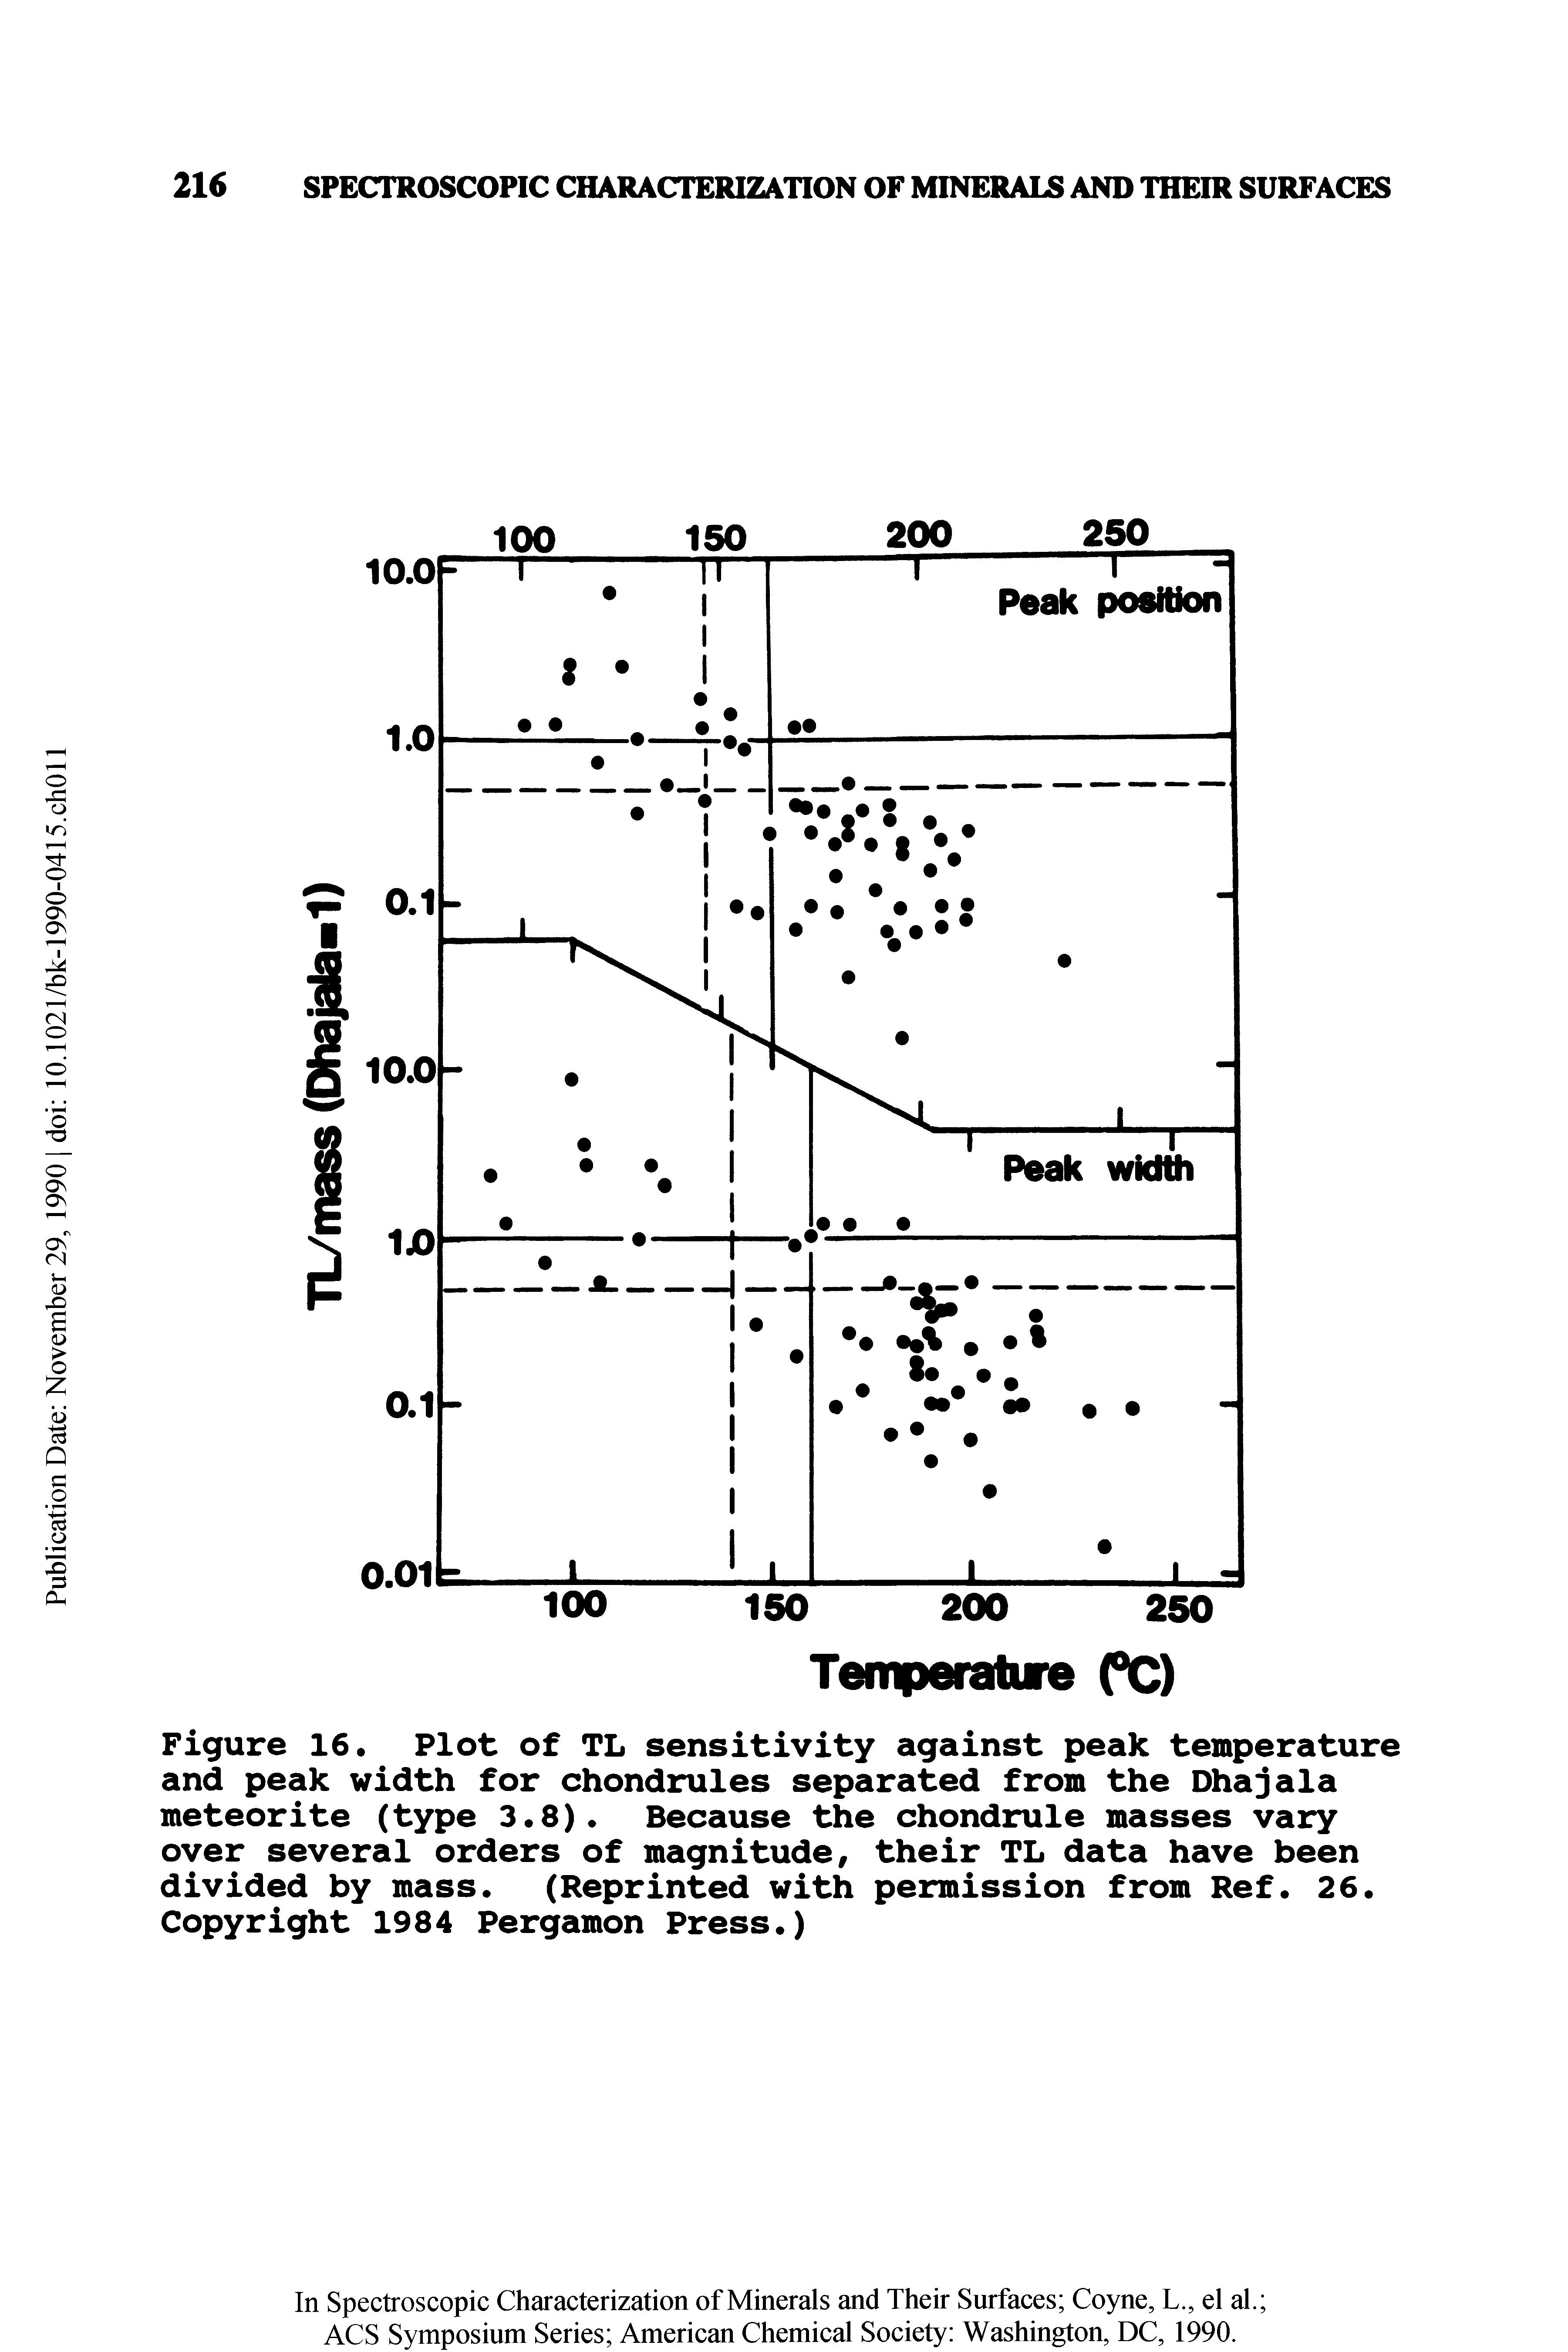 Figure 16. Plot of TL sensitivity against peak temperature and peak width for chondrules separated from the Dhajala meteorite (type 3.8). Because the chondrule masses vary over several orders of magnitude, their TL data have been divided by mass. (Reprinted with permission from Ref. 26. Copyright 1984 Pergamon Press.)...